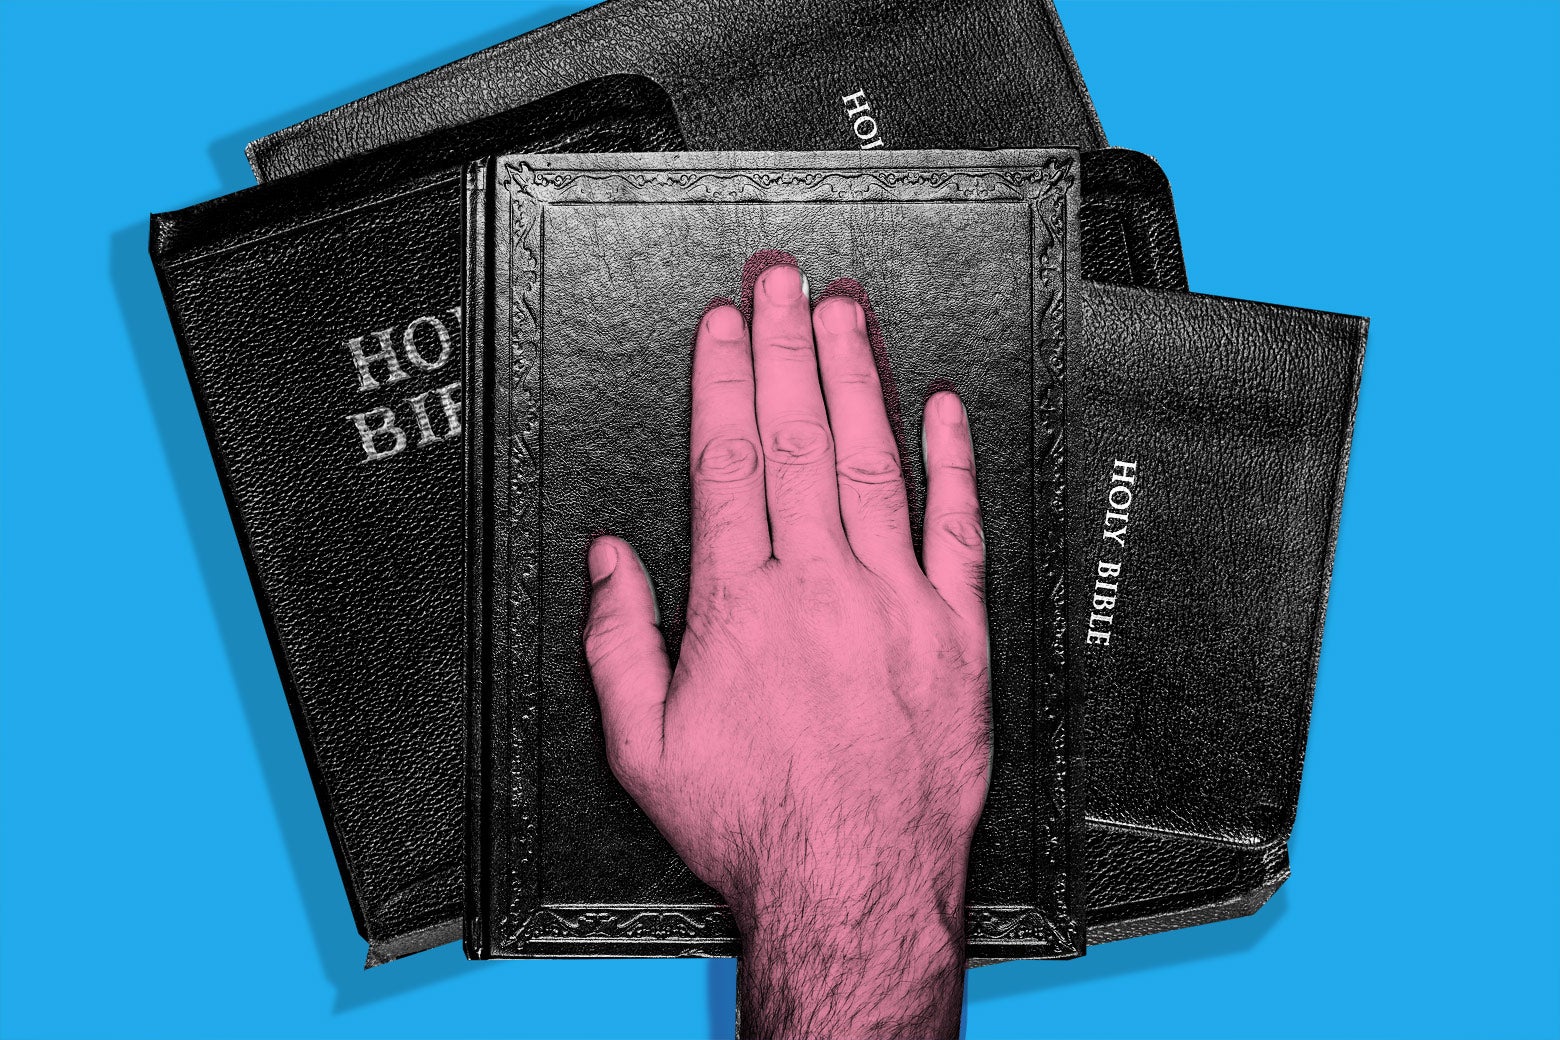 Photo illustration of a hand over a stack of Bibles.